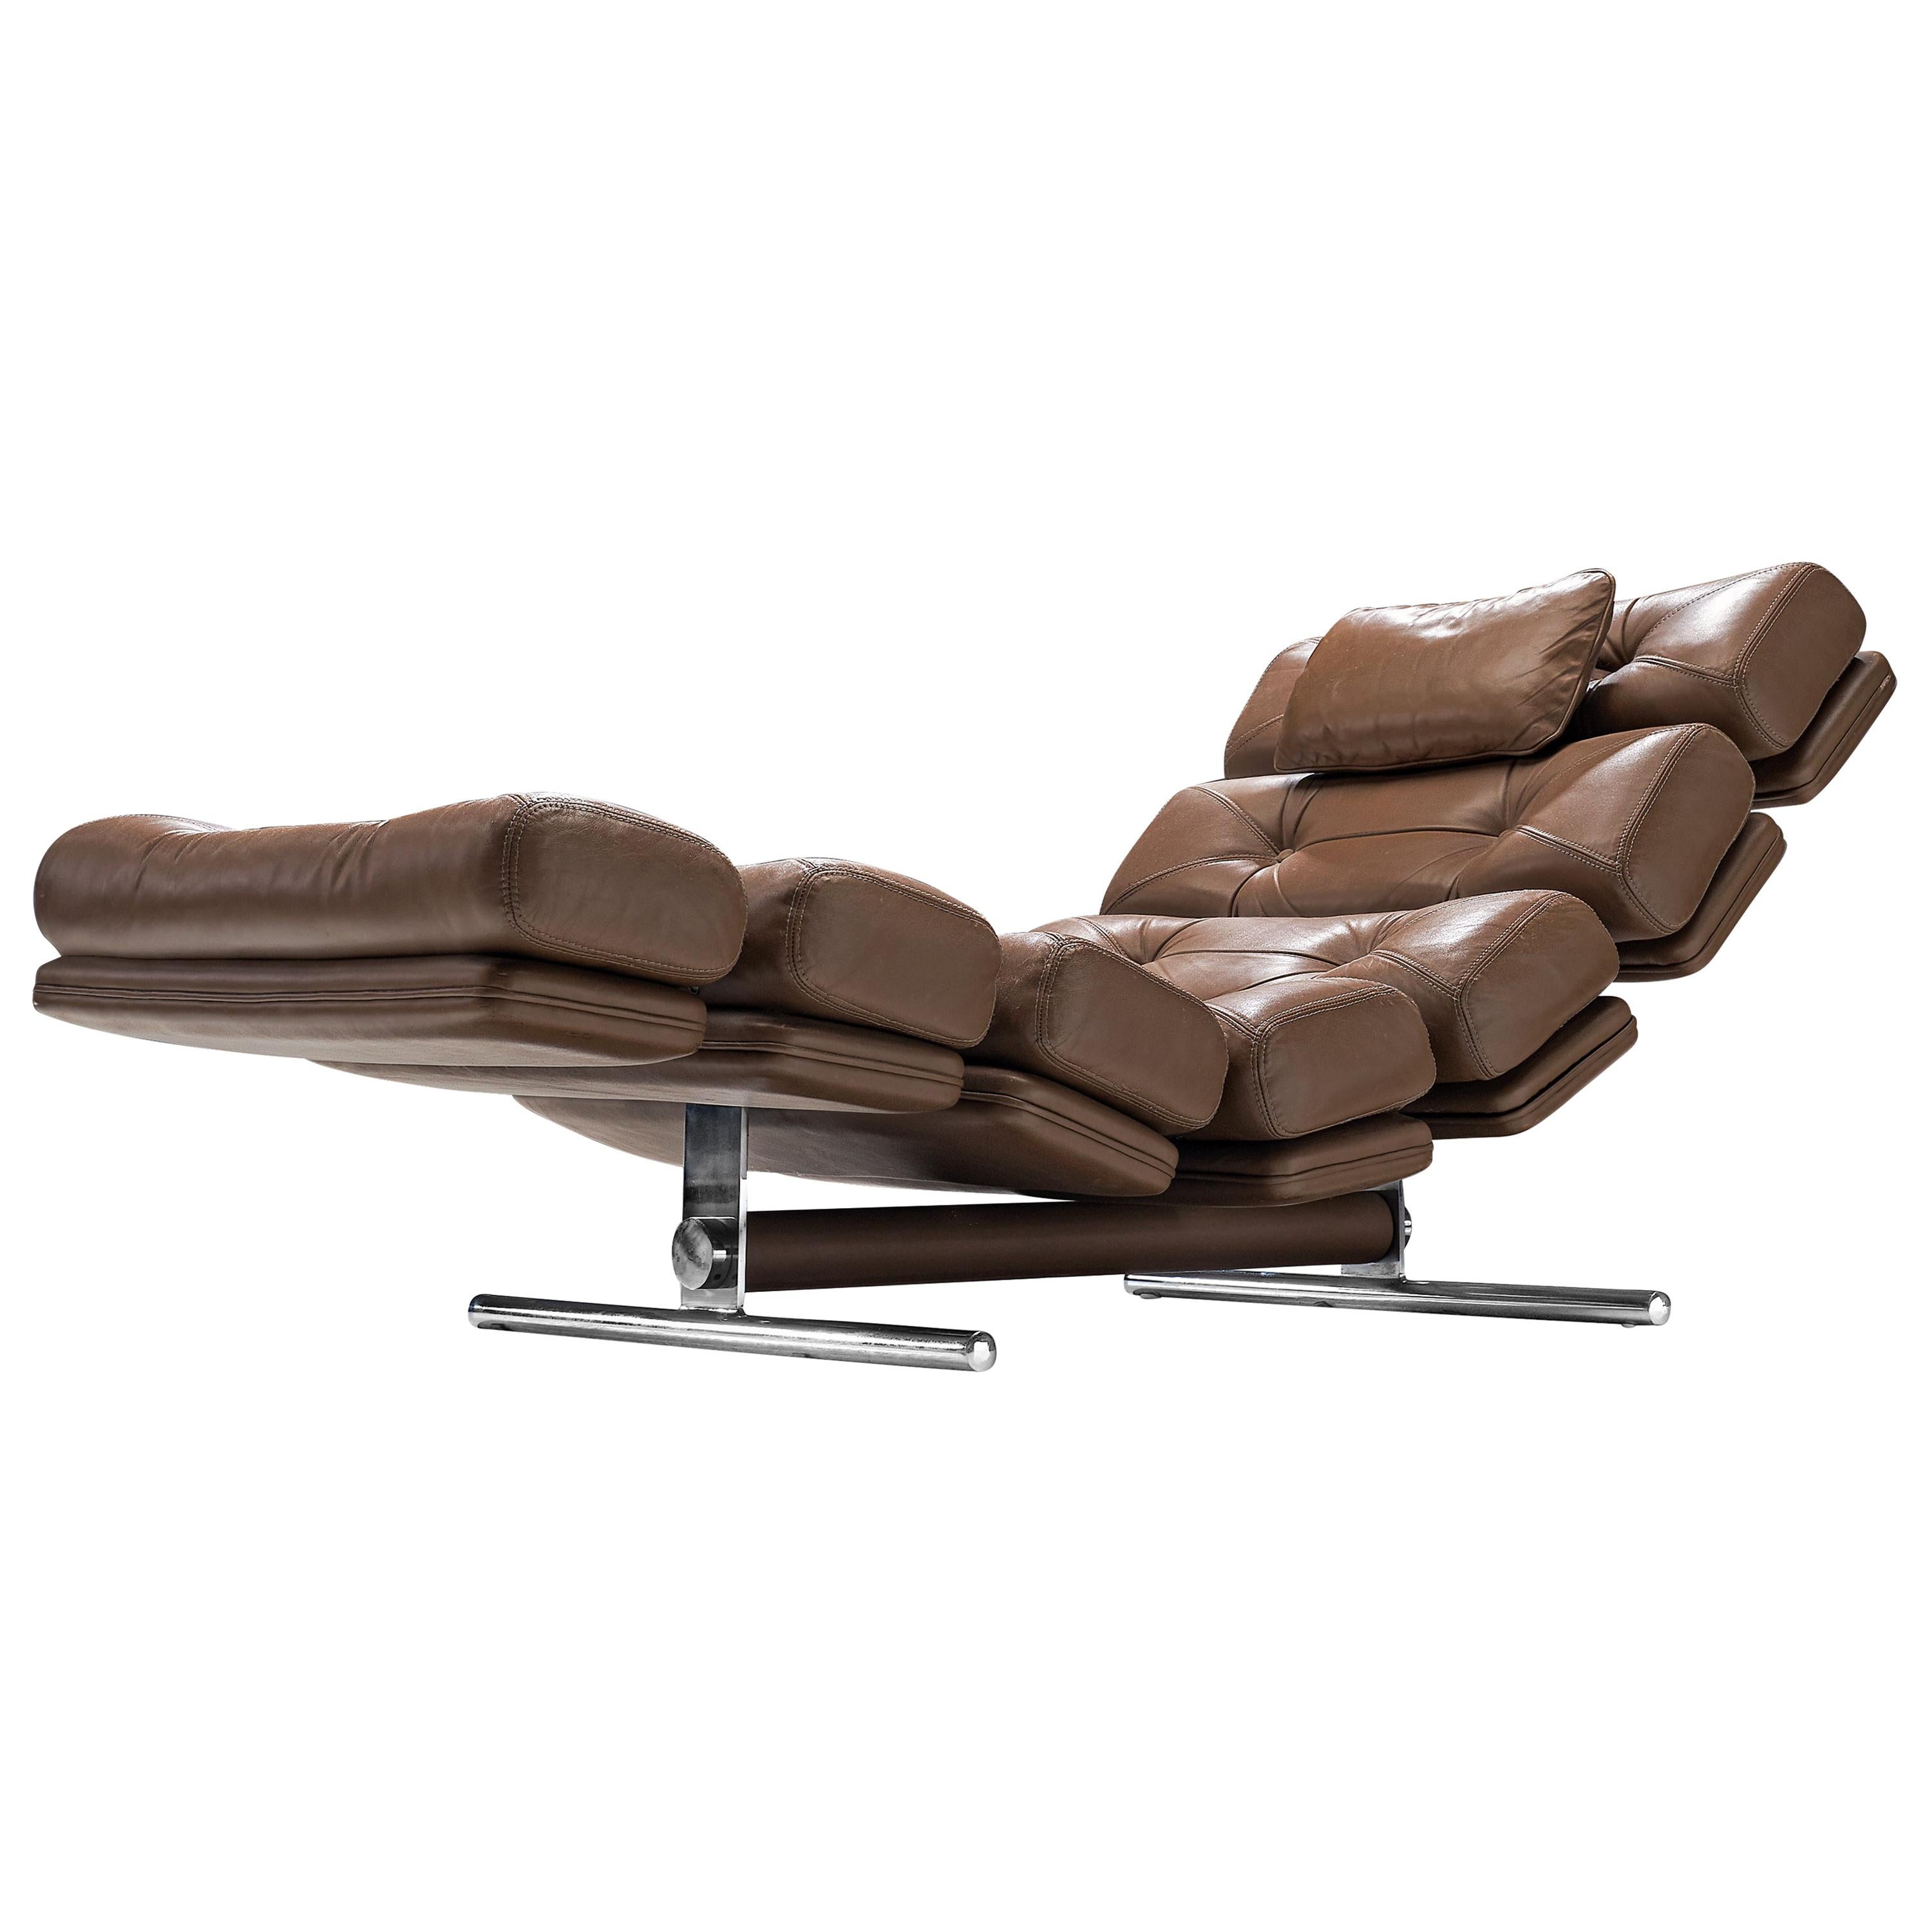 Ric Deforche for Gervan Chaise Lounge Model 'Lord' in Brown Leather